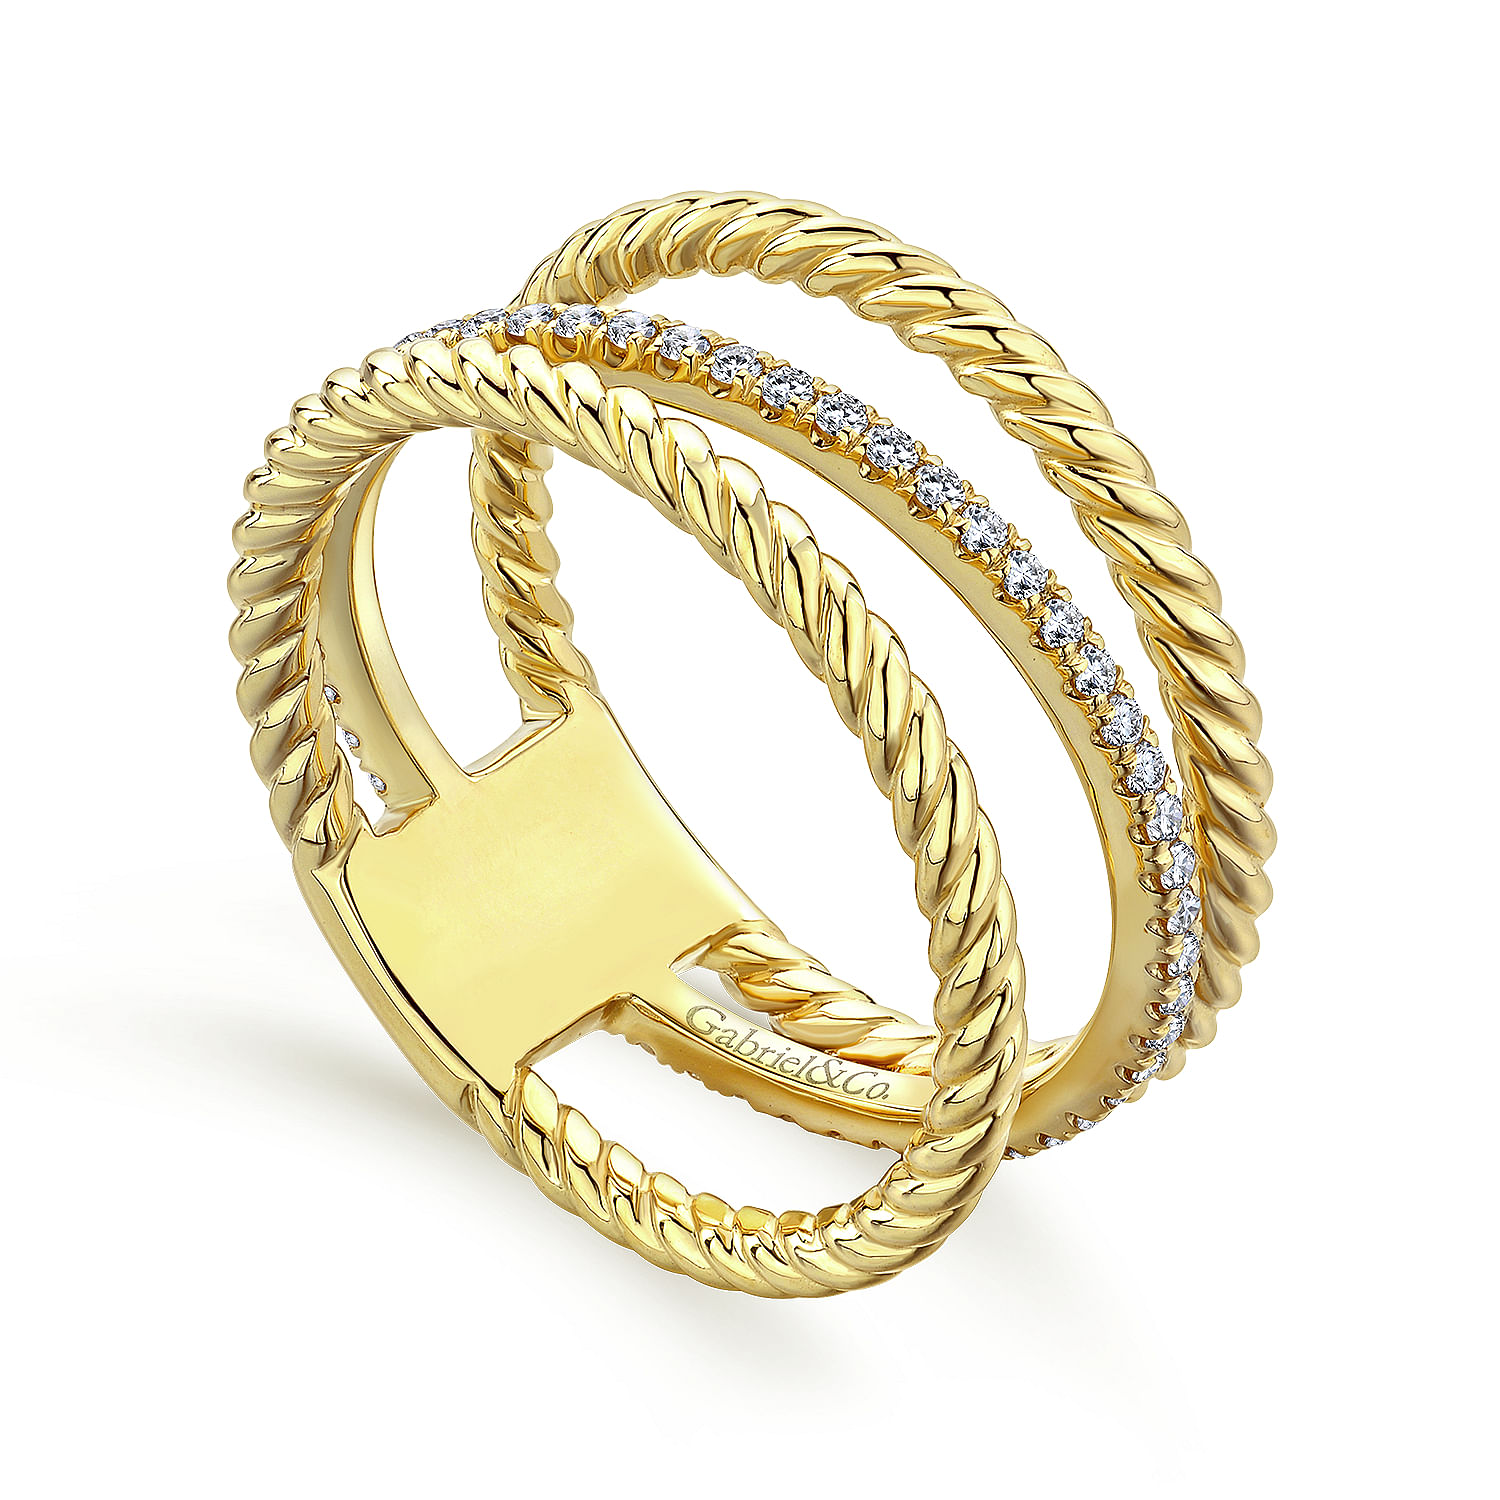 14K Yellow Gold Three Row Twisted Rope and Diamond Band Open Ring